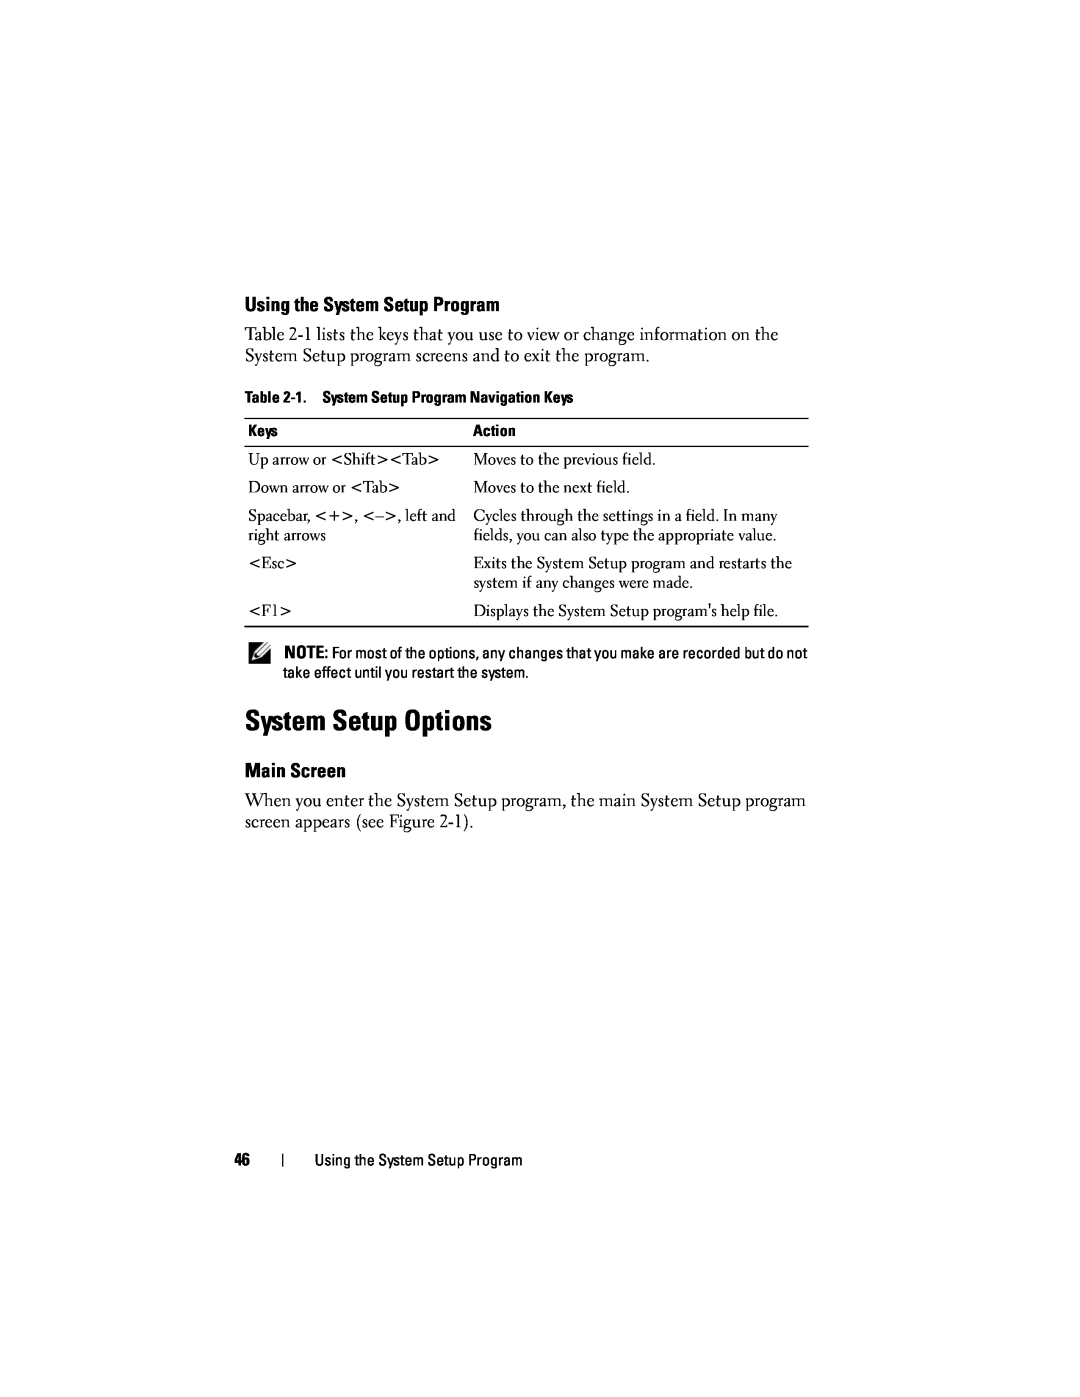 Dell R300 owner manual System Setup Options, Using the System Setup Program, Main Screen 